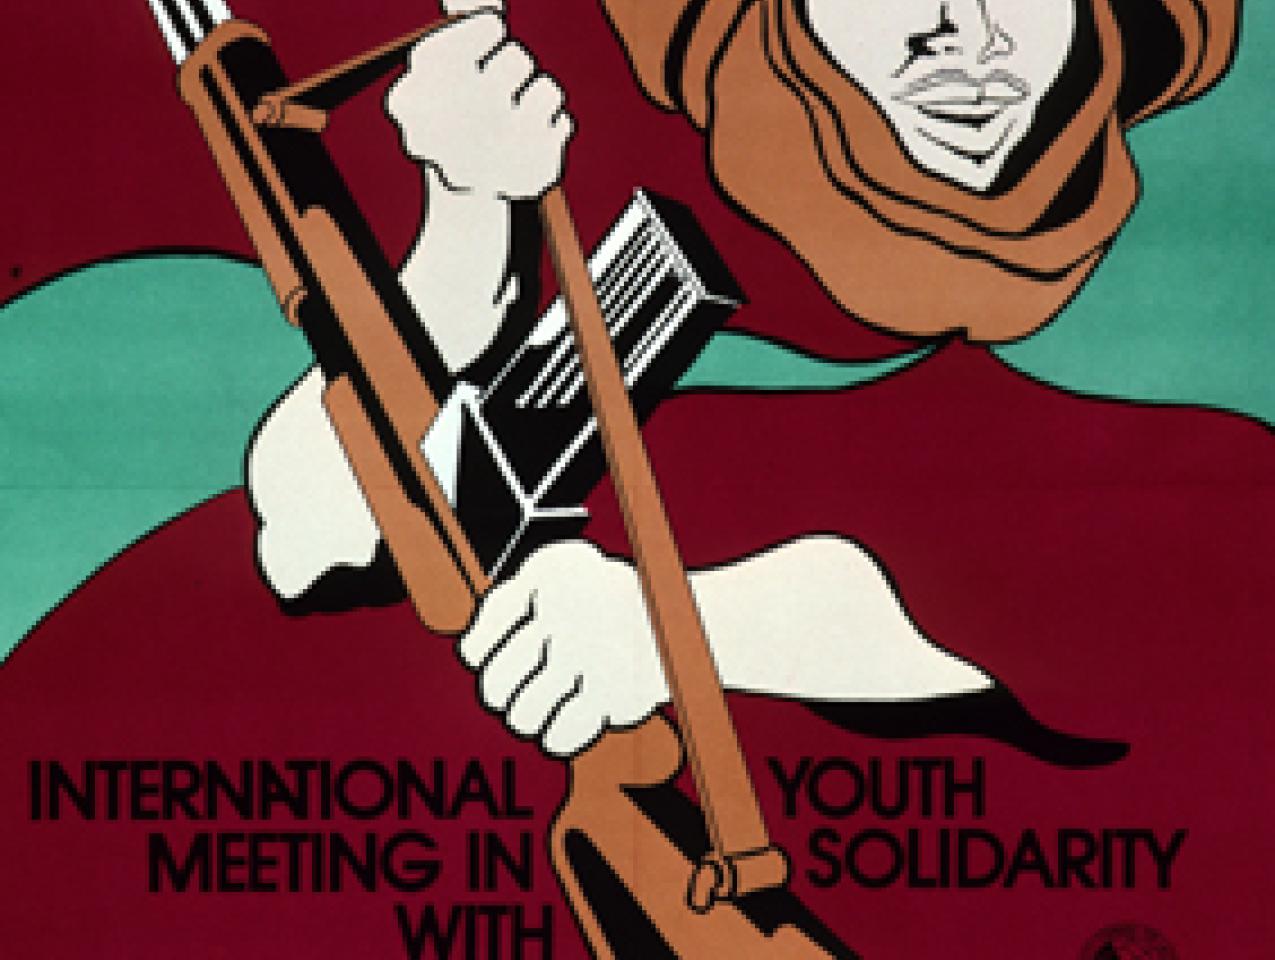 Poster Collection, INT 503, Hoover Institution Archives.